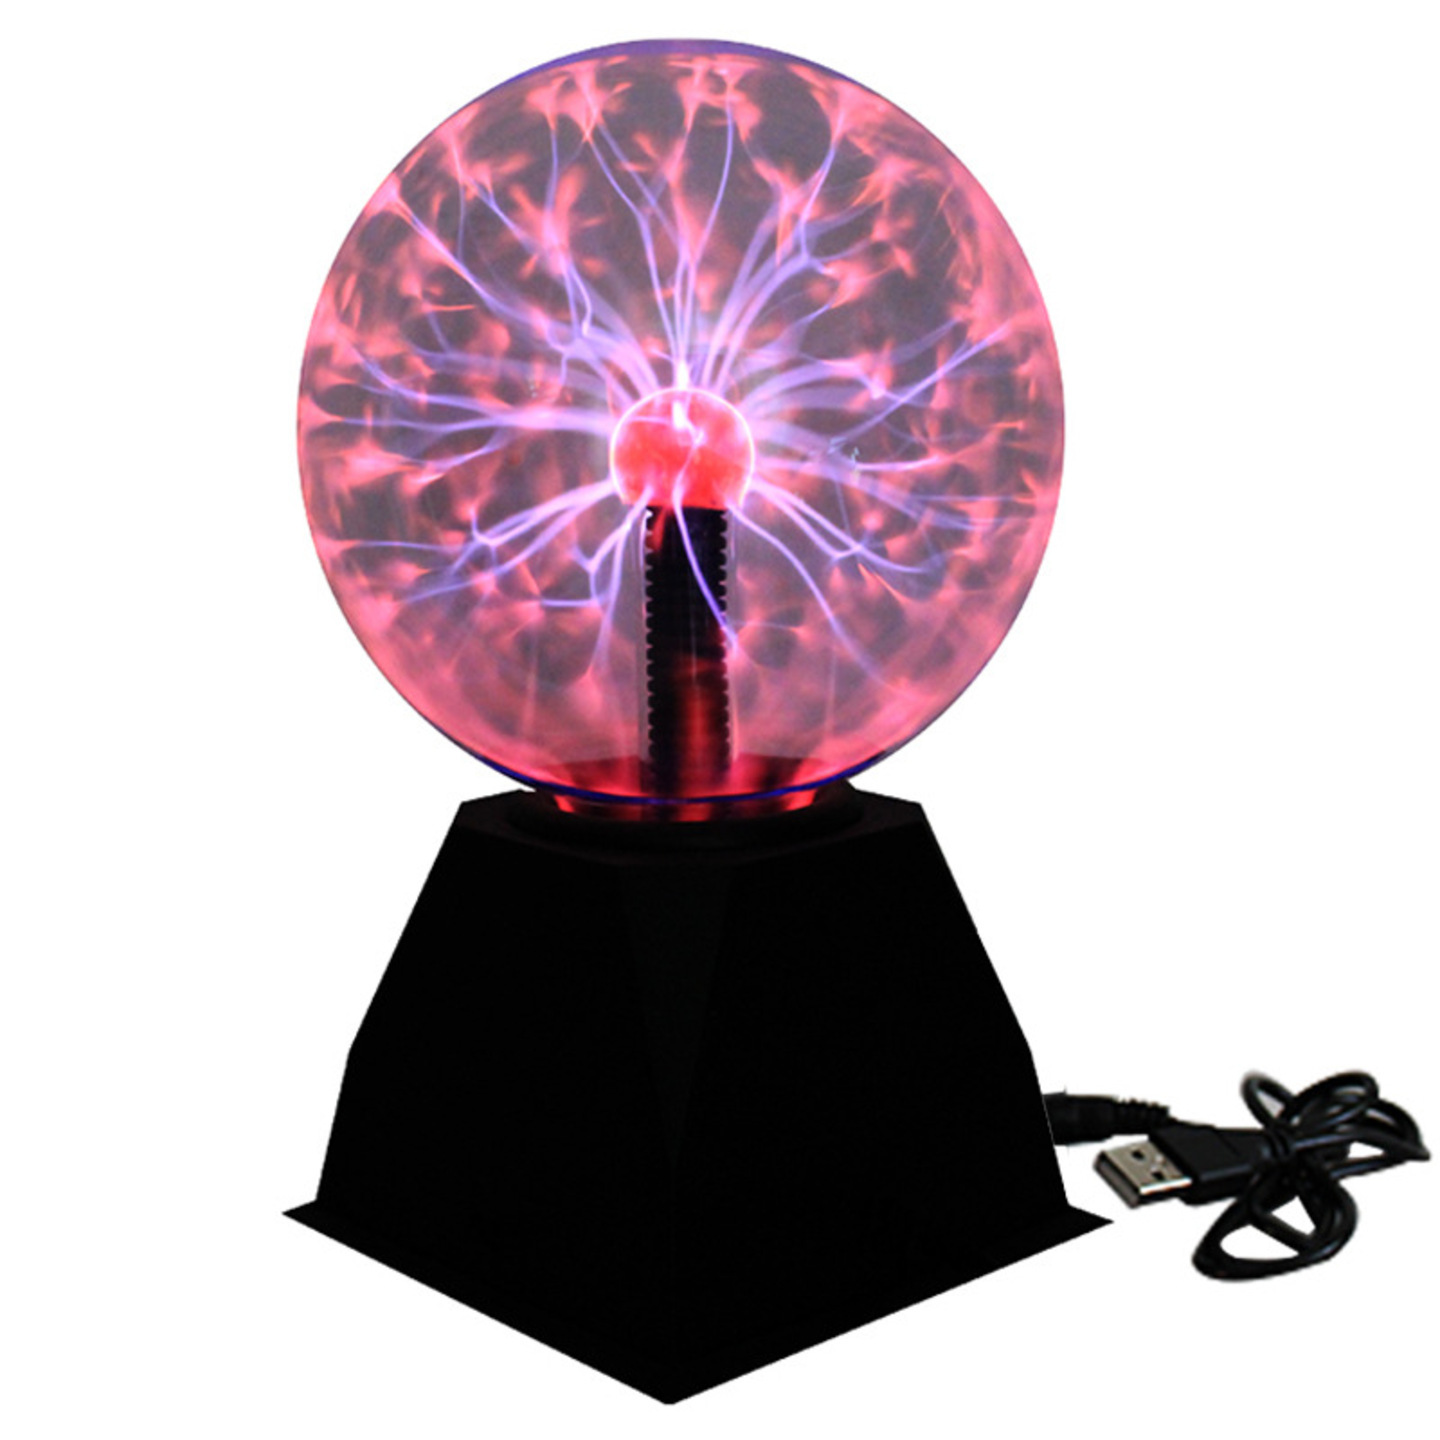 Unleash the Power and Fascination of Plasma Balls with USB Power Interface